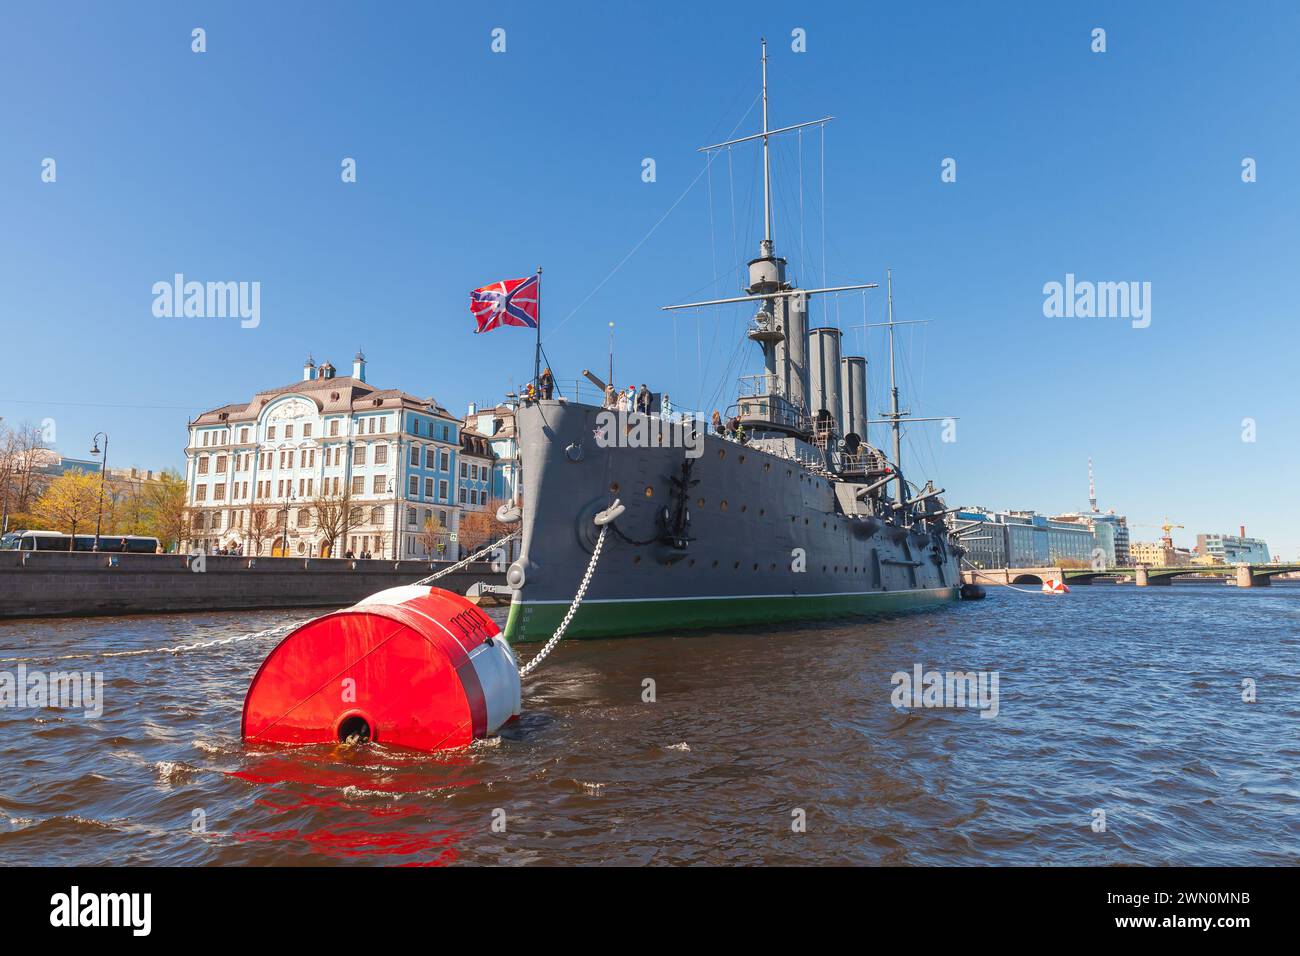 St-Petersburg, Russia - May 21, 2022: Aurora is a Russian protected cruiser is moored on Neva river in St.Petersburg, currently preserved as a museum Stock Photo